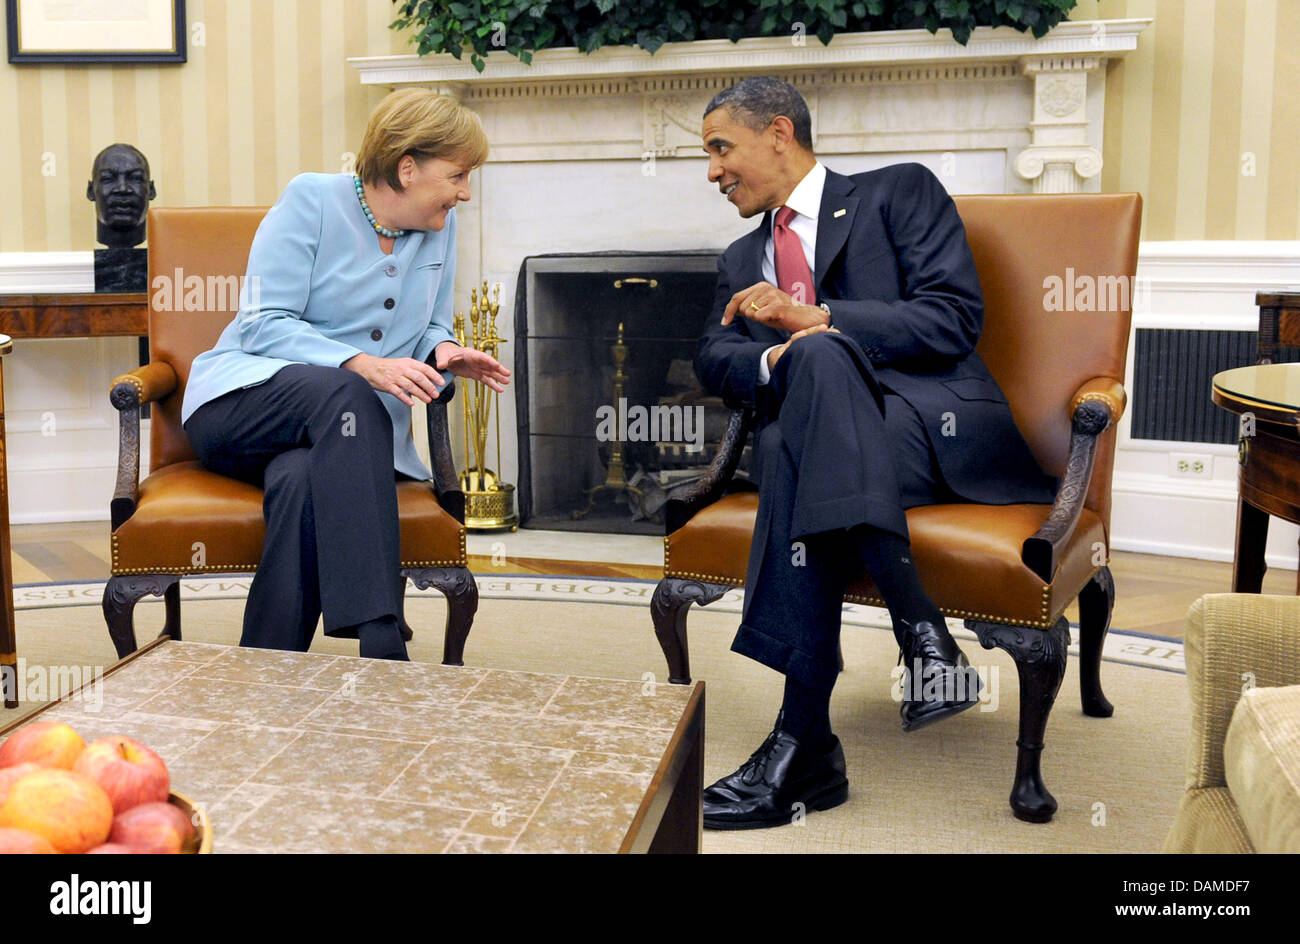 German Chancellor Angela Merkel and US President Barack Obama converse in  the Oval Office inside the White House in Washington, D.C., USA, 7 June  2011. Merkel is on a two-day-visit to the